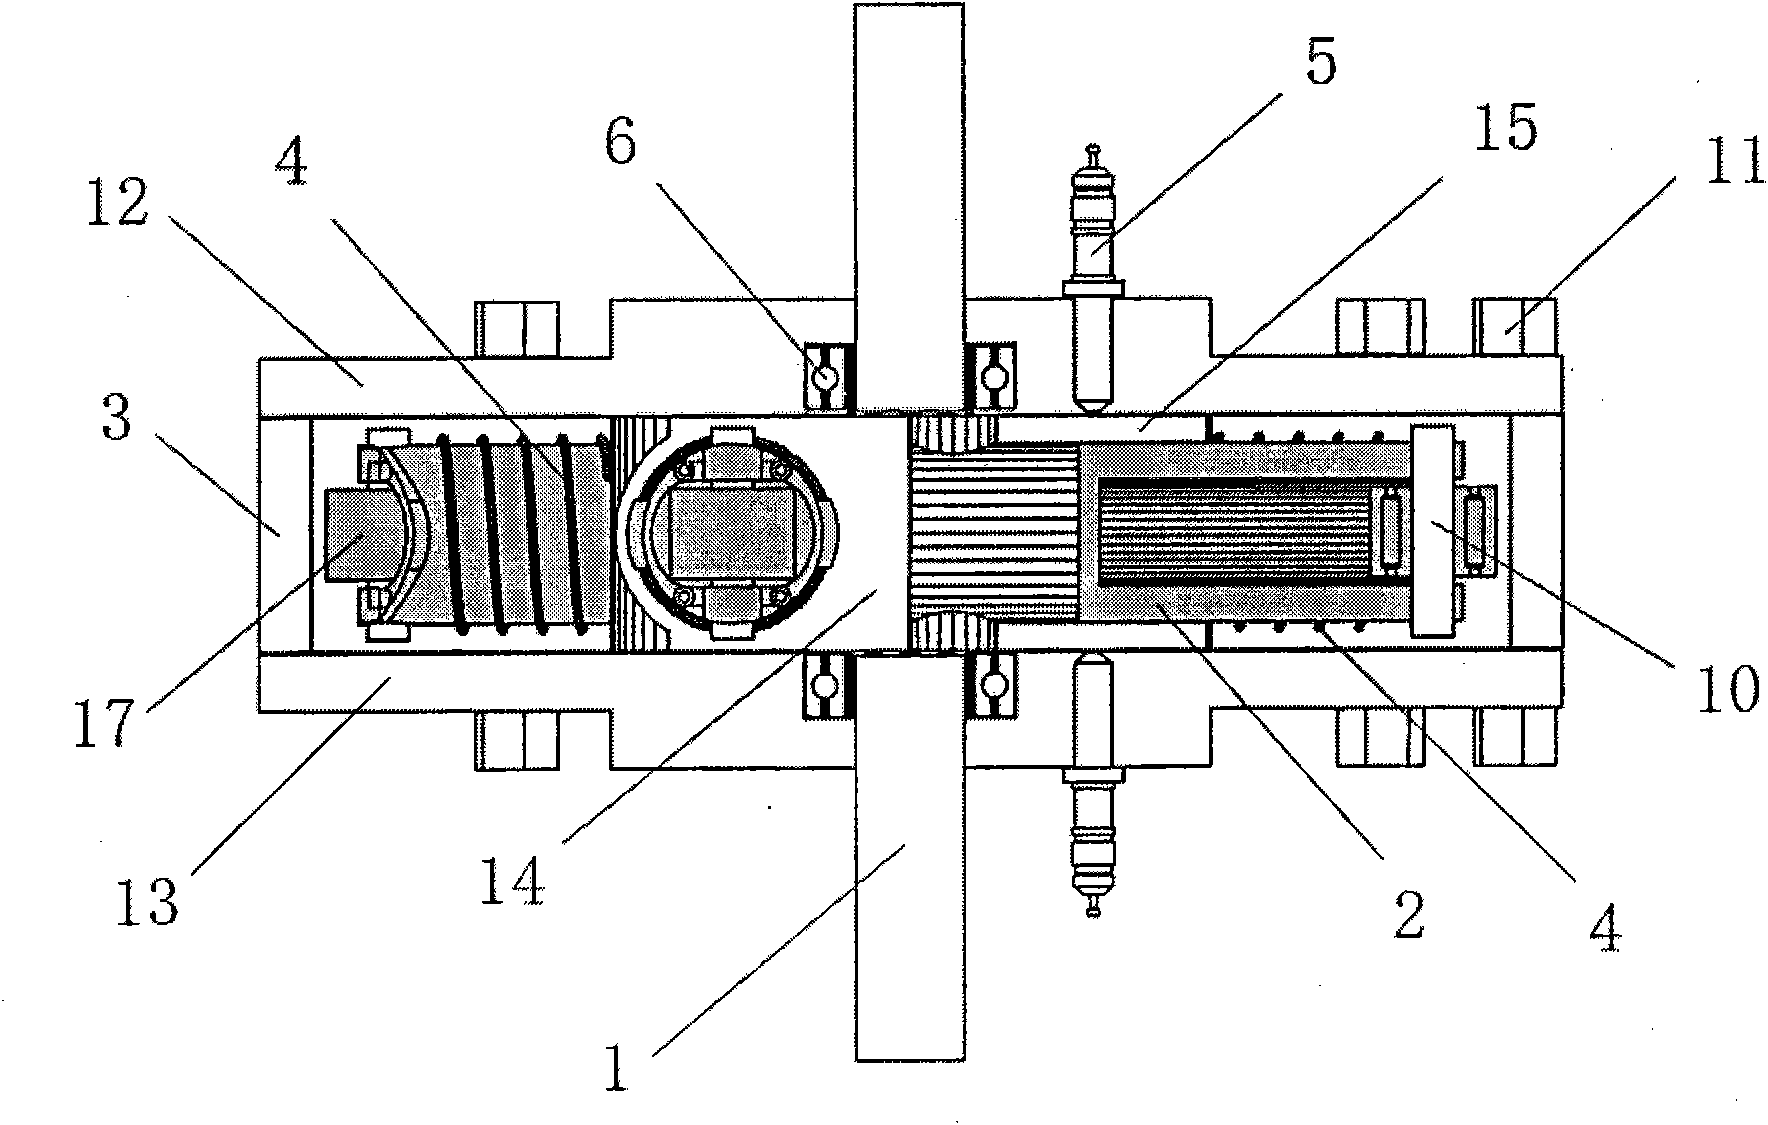 Cylinder and piston co-rotating type engine